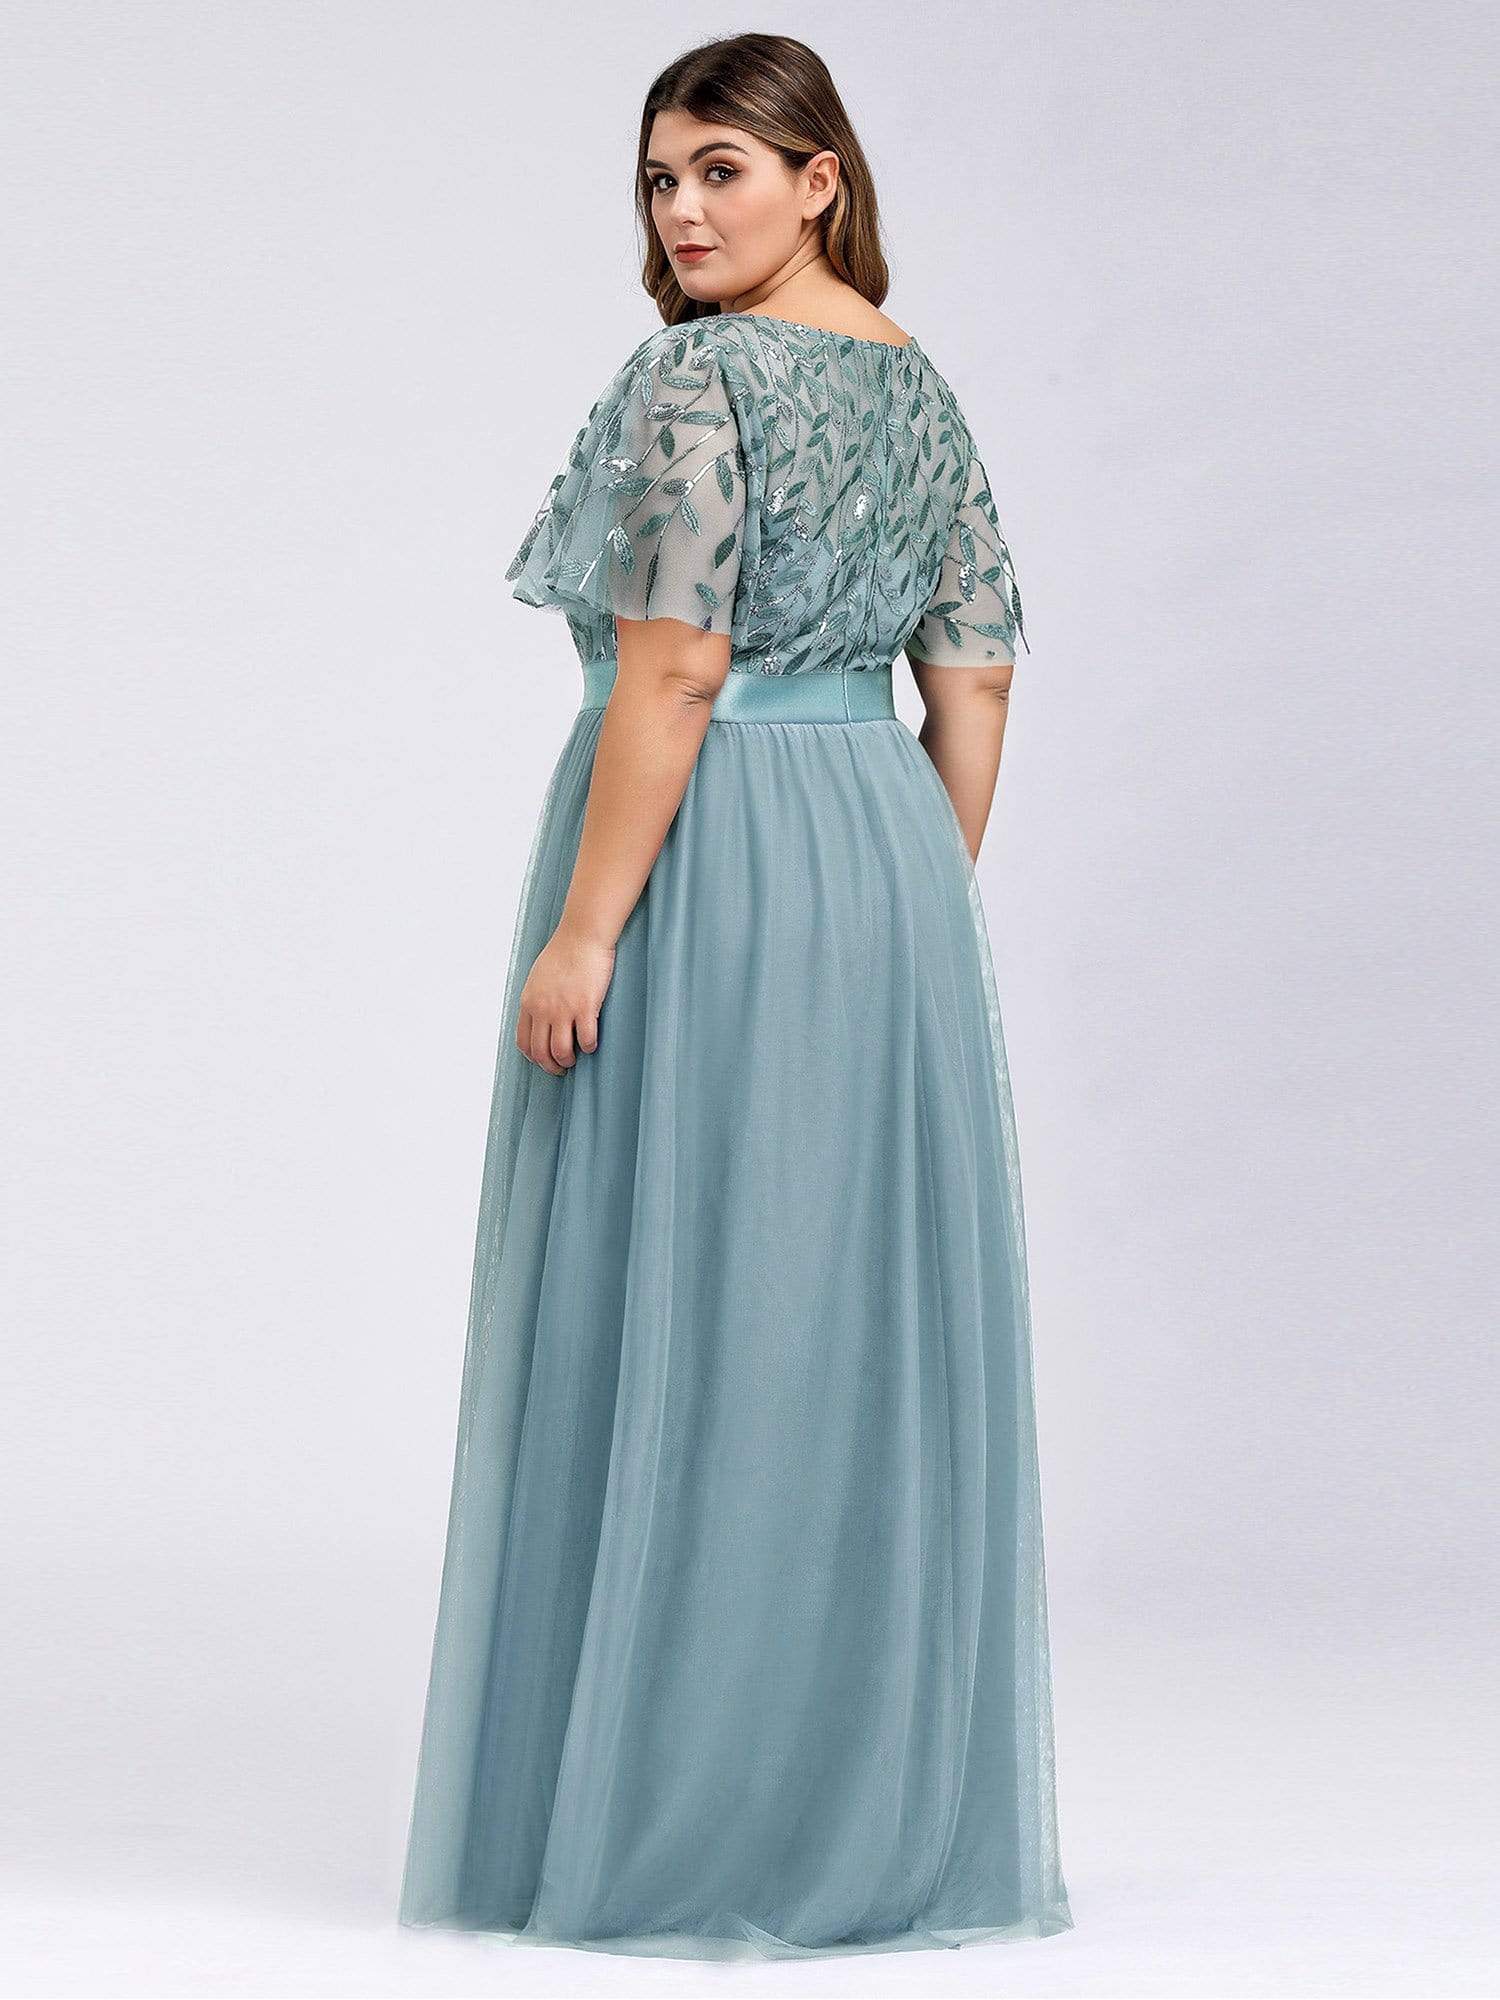 Plus Size Women's Embroidery Evening Dresses with Short Sleeve